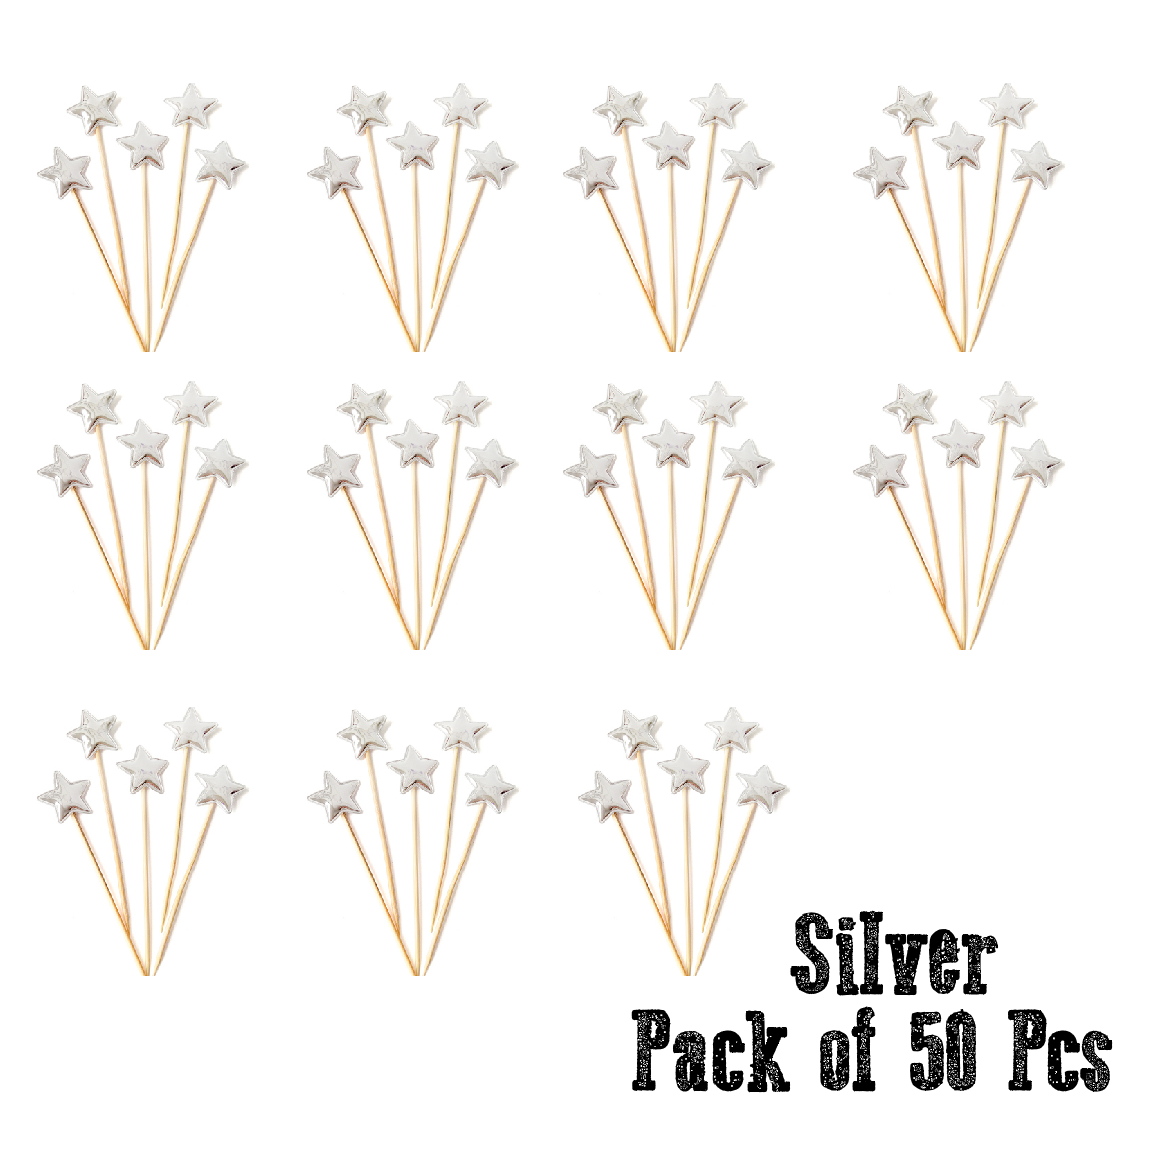 Cupcake Topper Cake Topper Decorations- Silver stars, 50 pack - Rampant Coffee Company